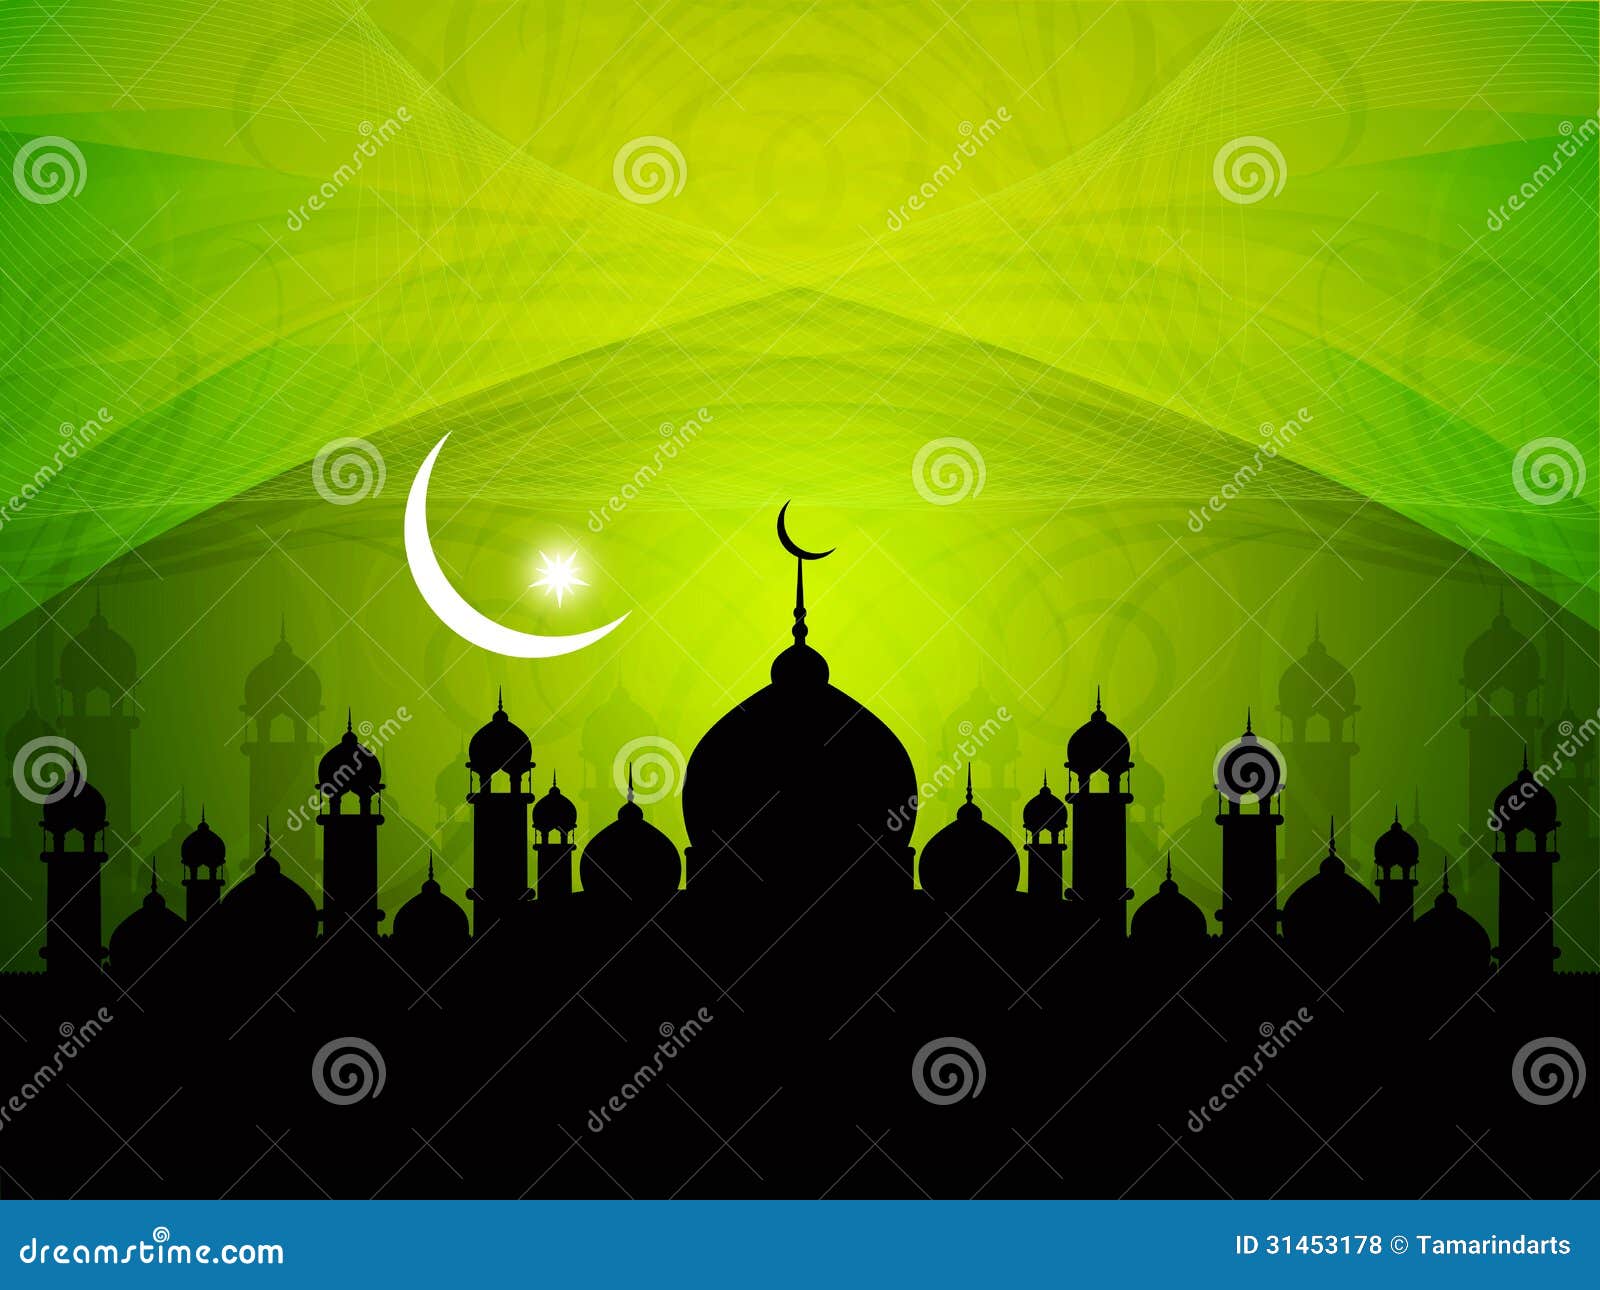 Religious Eid Background Design With Mosque. Royalty Free 